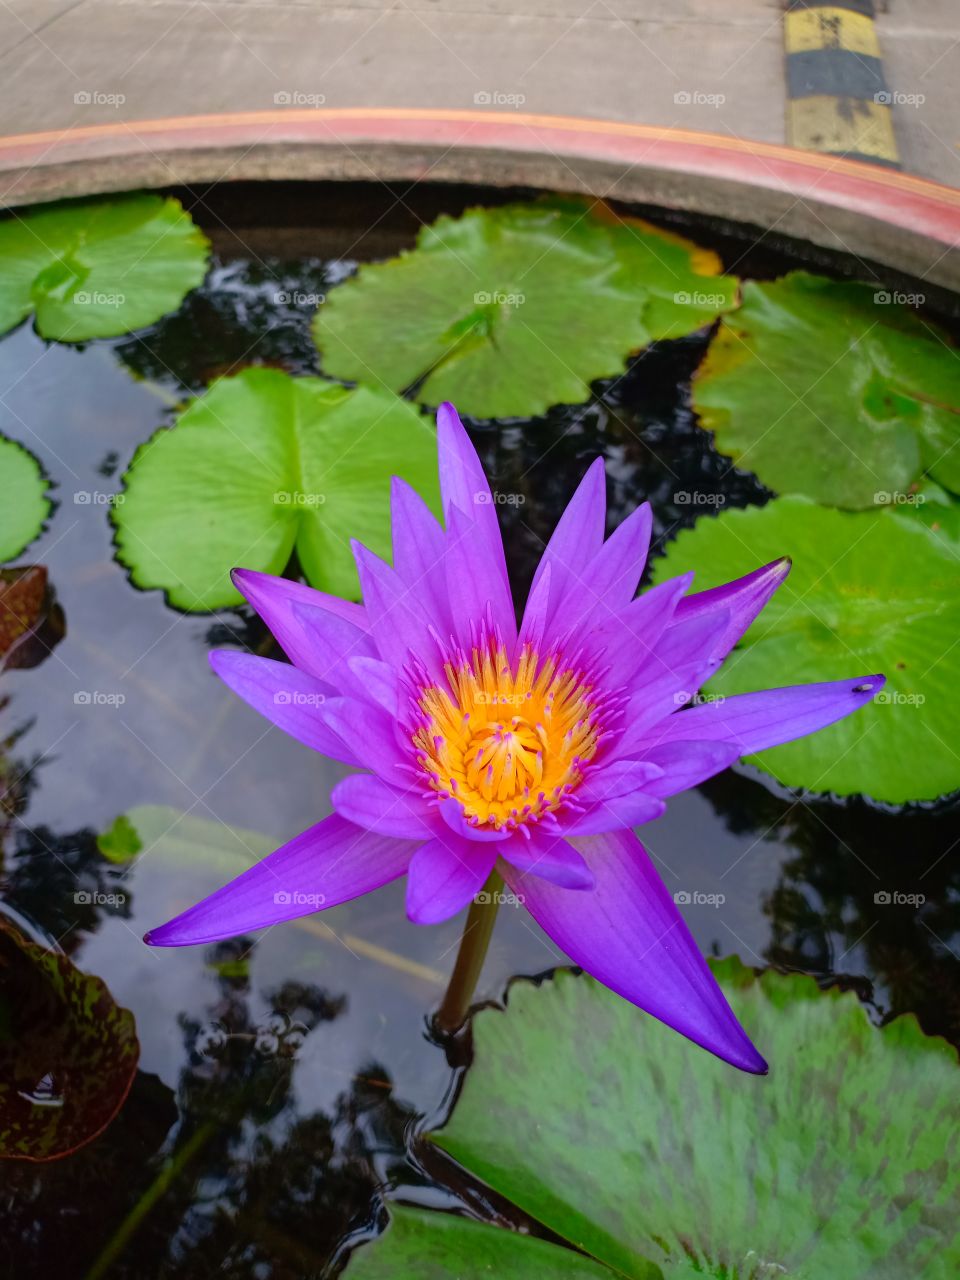 Purple lotus flower, which grows naturally in water.